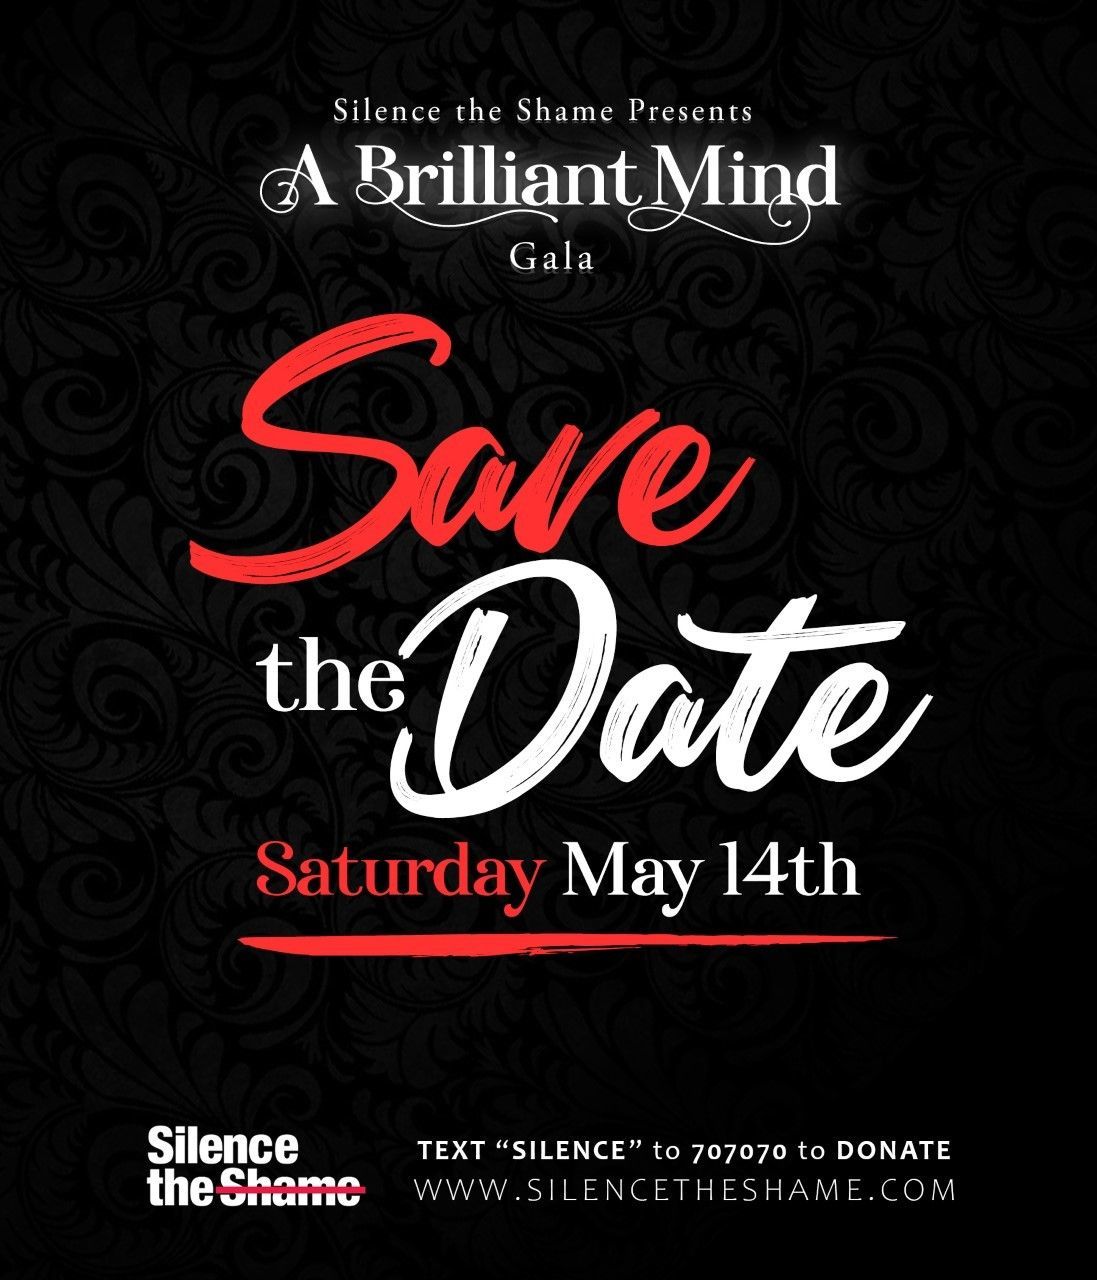 SAVE THE DATE: 2nd Annual A Brilliant Mind Gala on May 14th